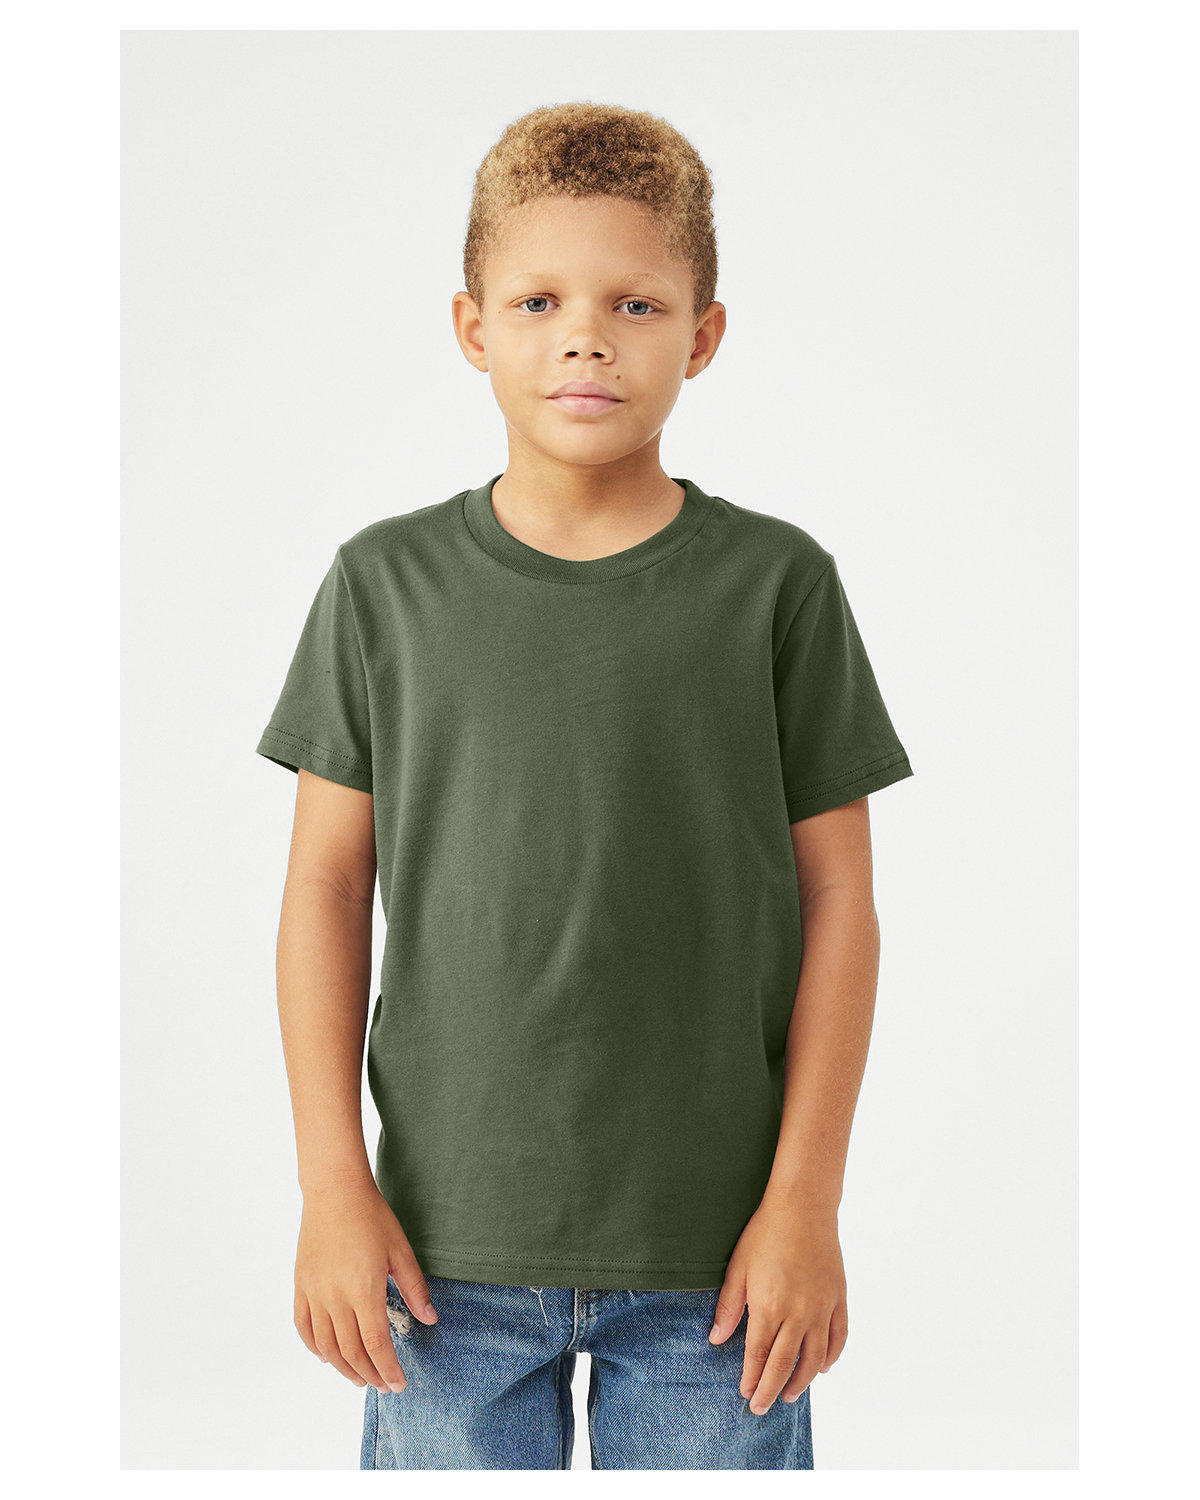 Bella + Canvas Youth Jersey T-Shirt military green 